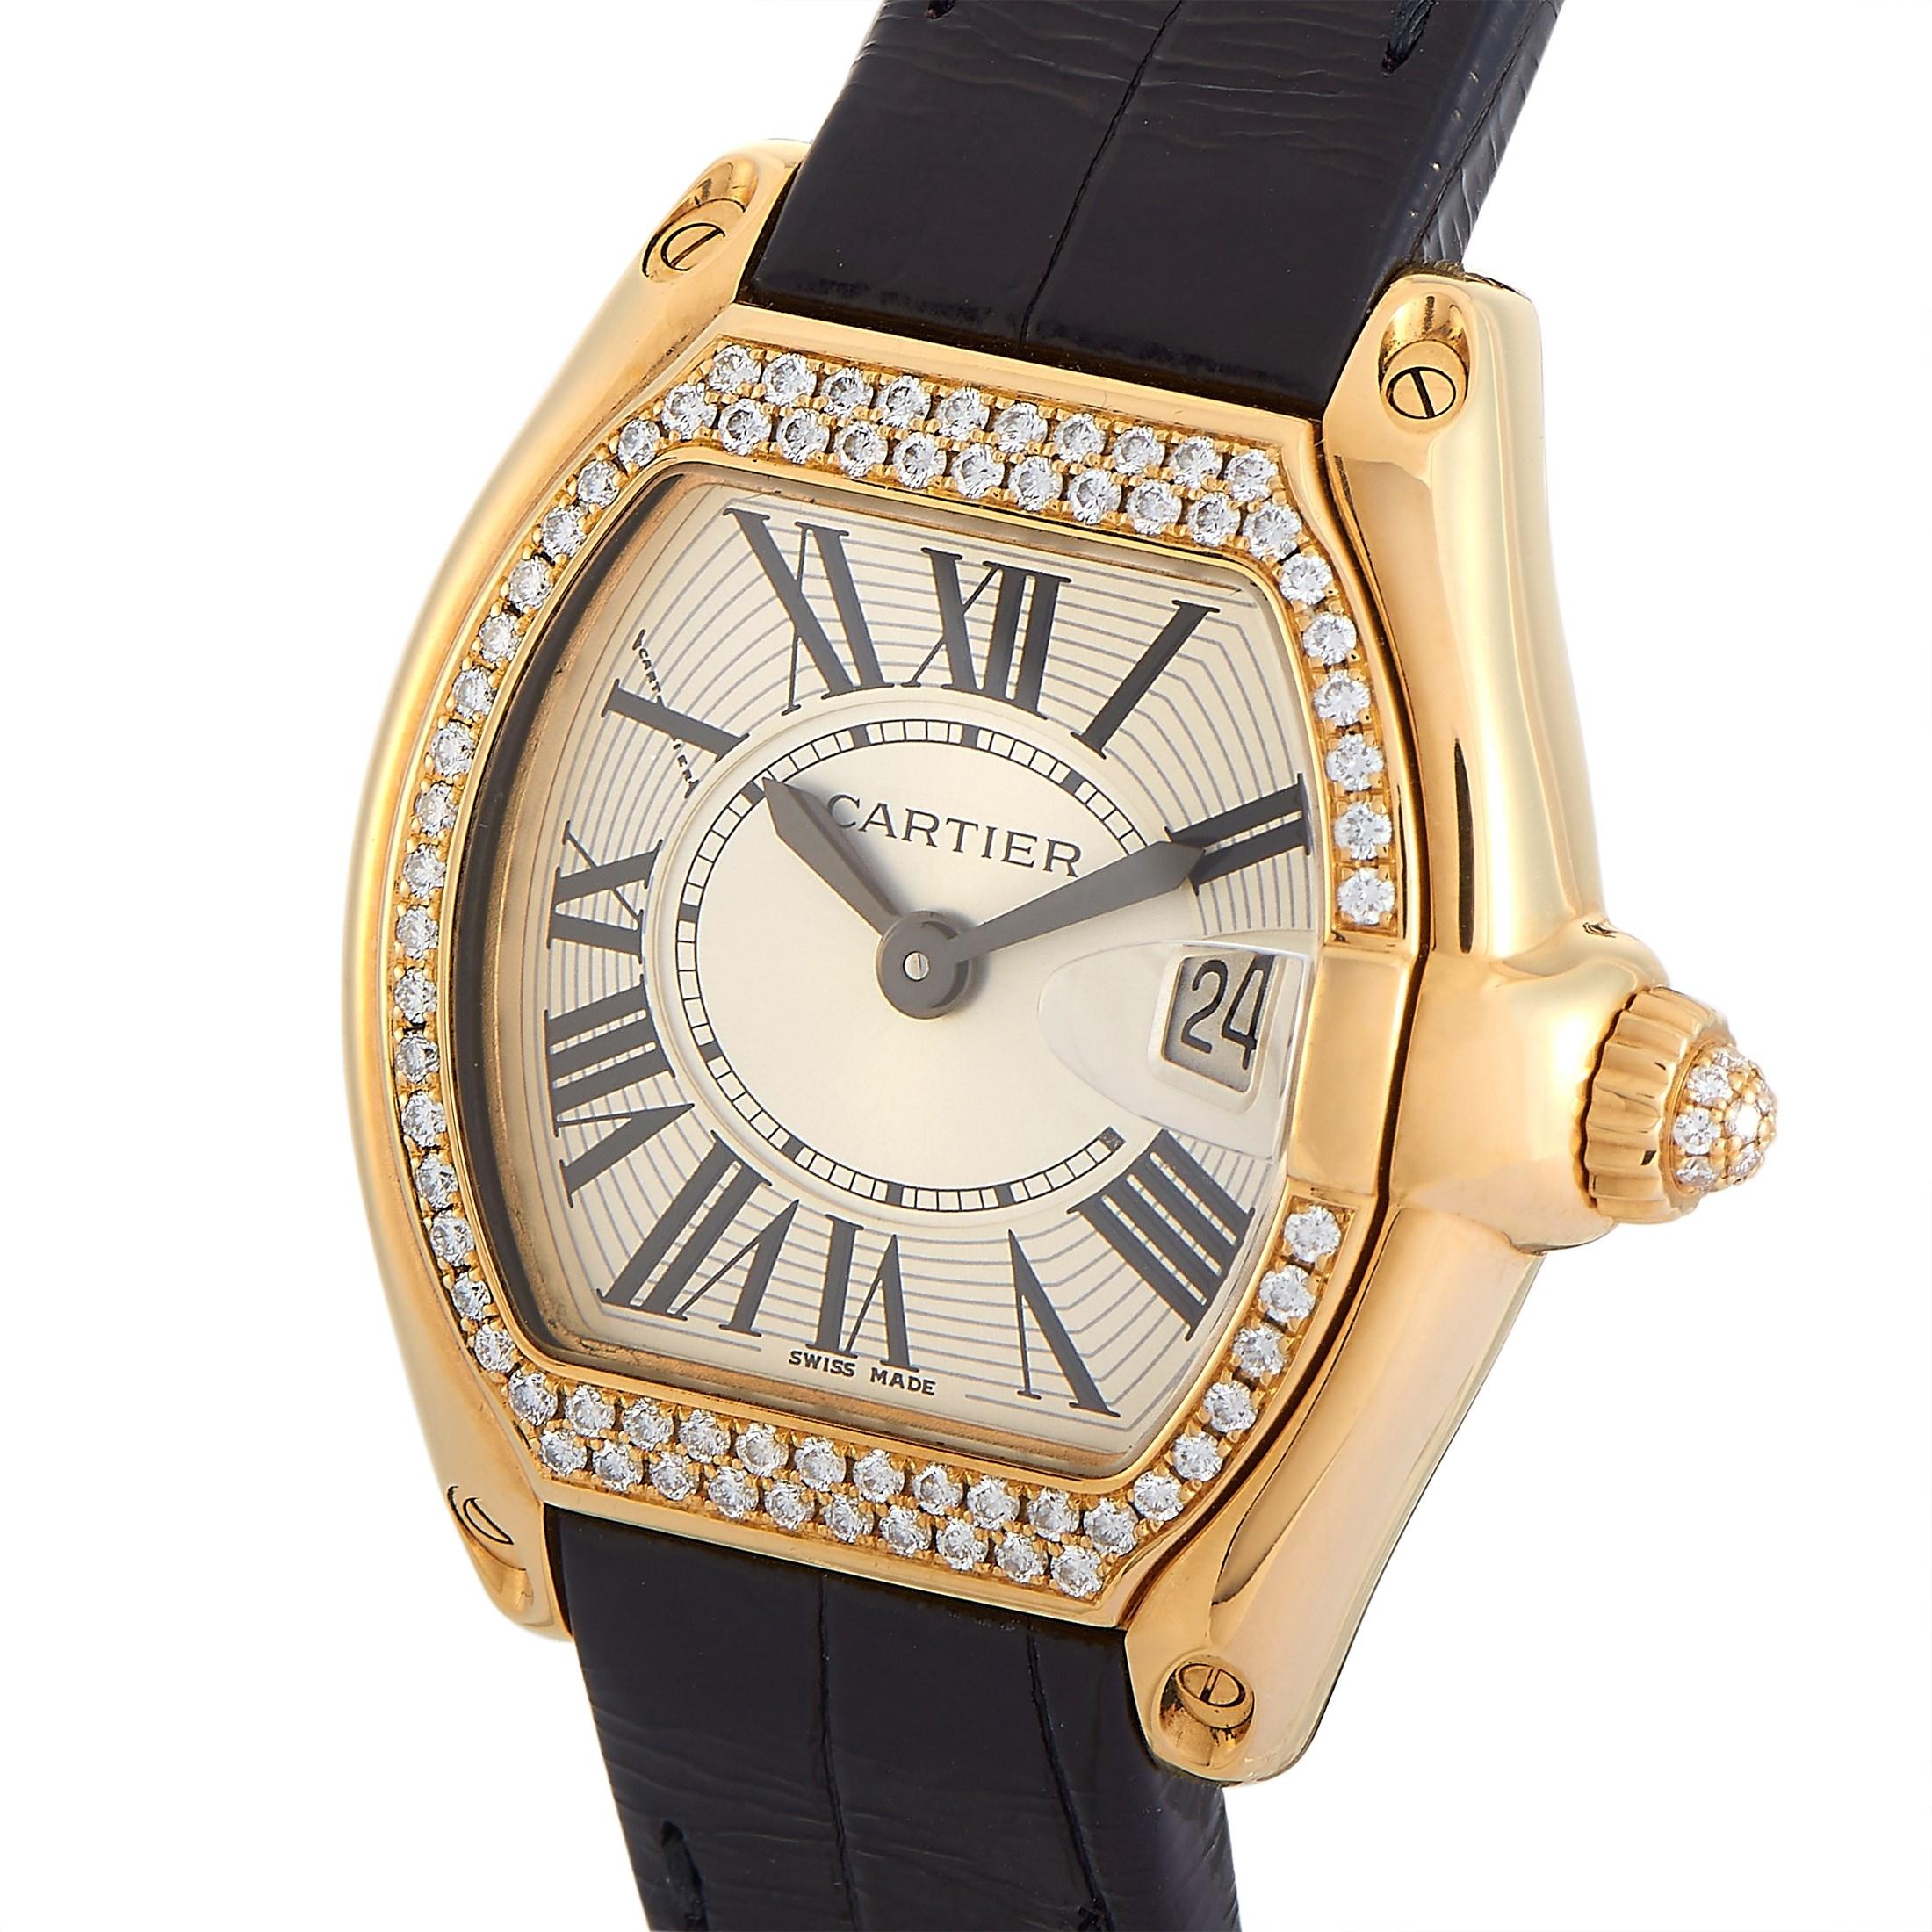 No longer in production, here is your chance to own a Cartier Roadster which debuted in 2001. This Cartier Roadster 18K Rose Gold Diamond Bezel Quartz Watch 3852 features an 18K rose gold case with diamonds set on the bezel. The pull/push crown also